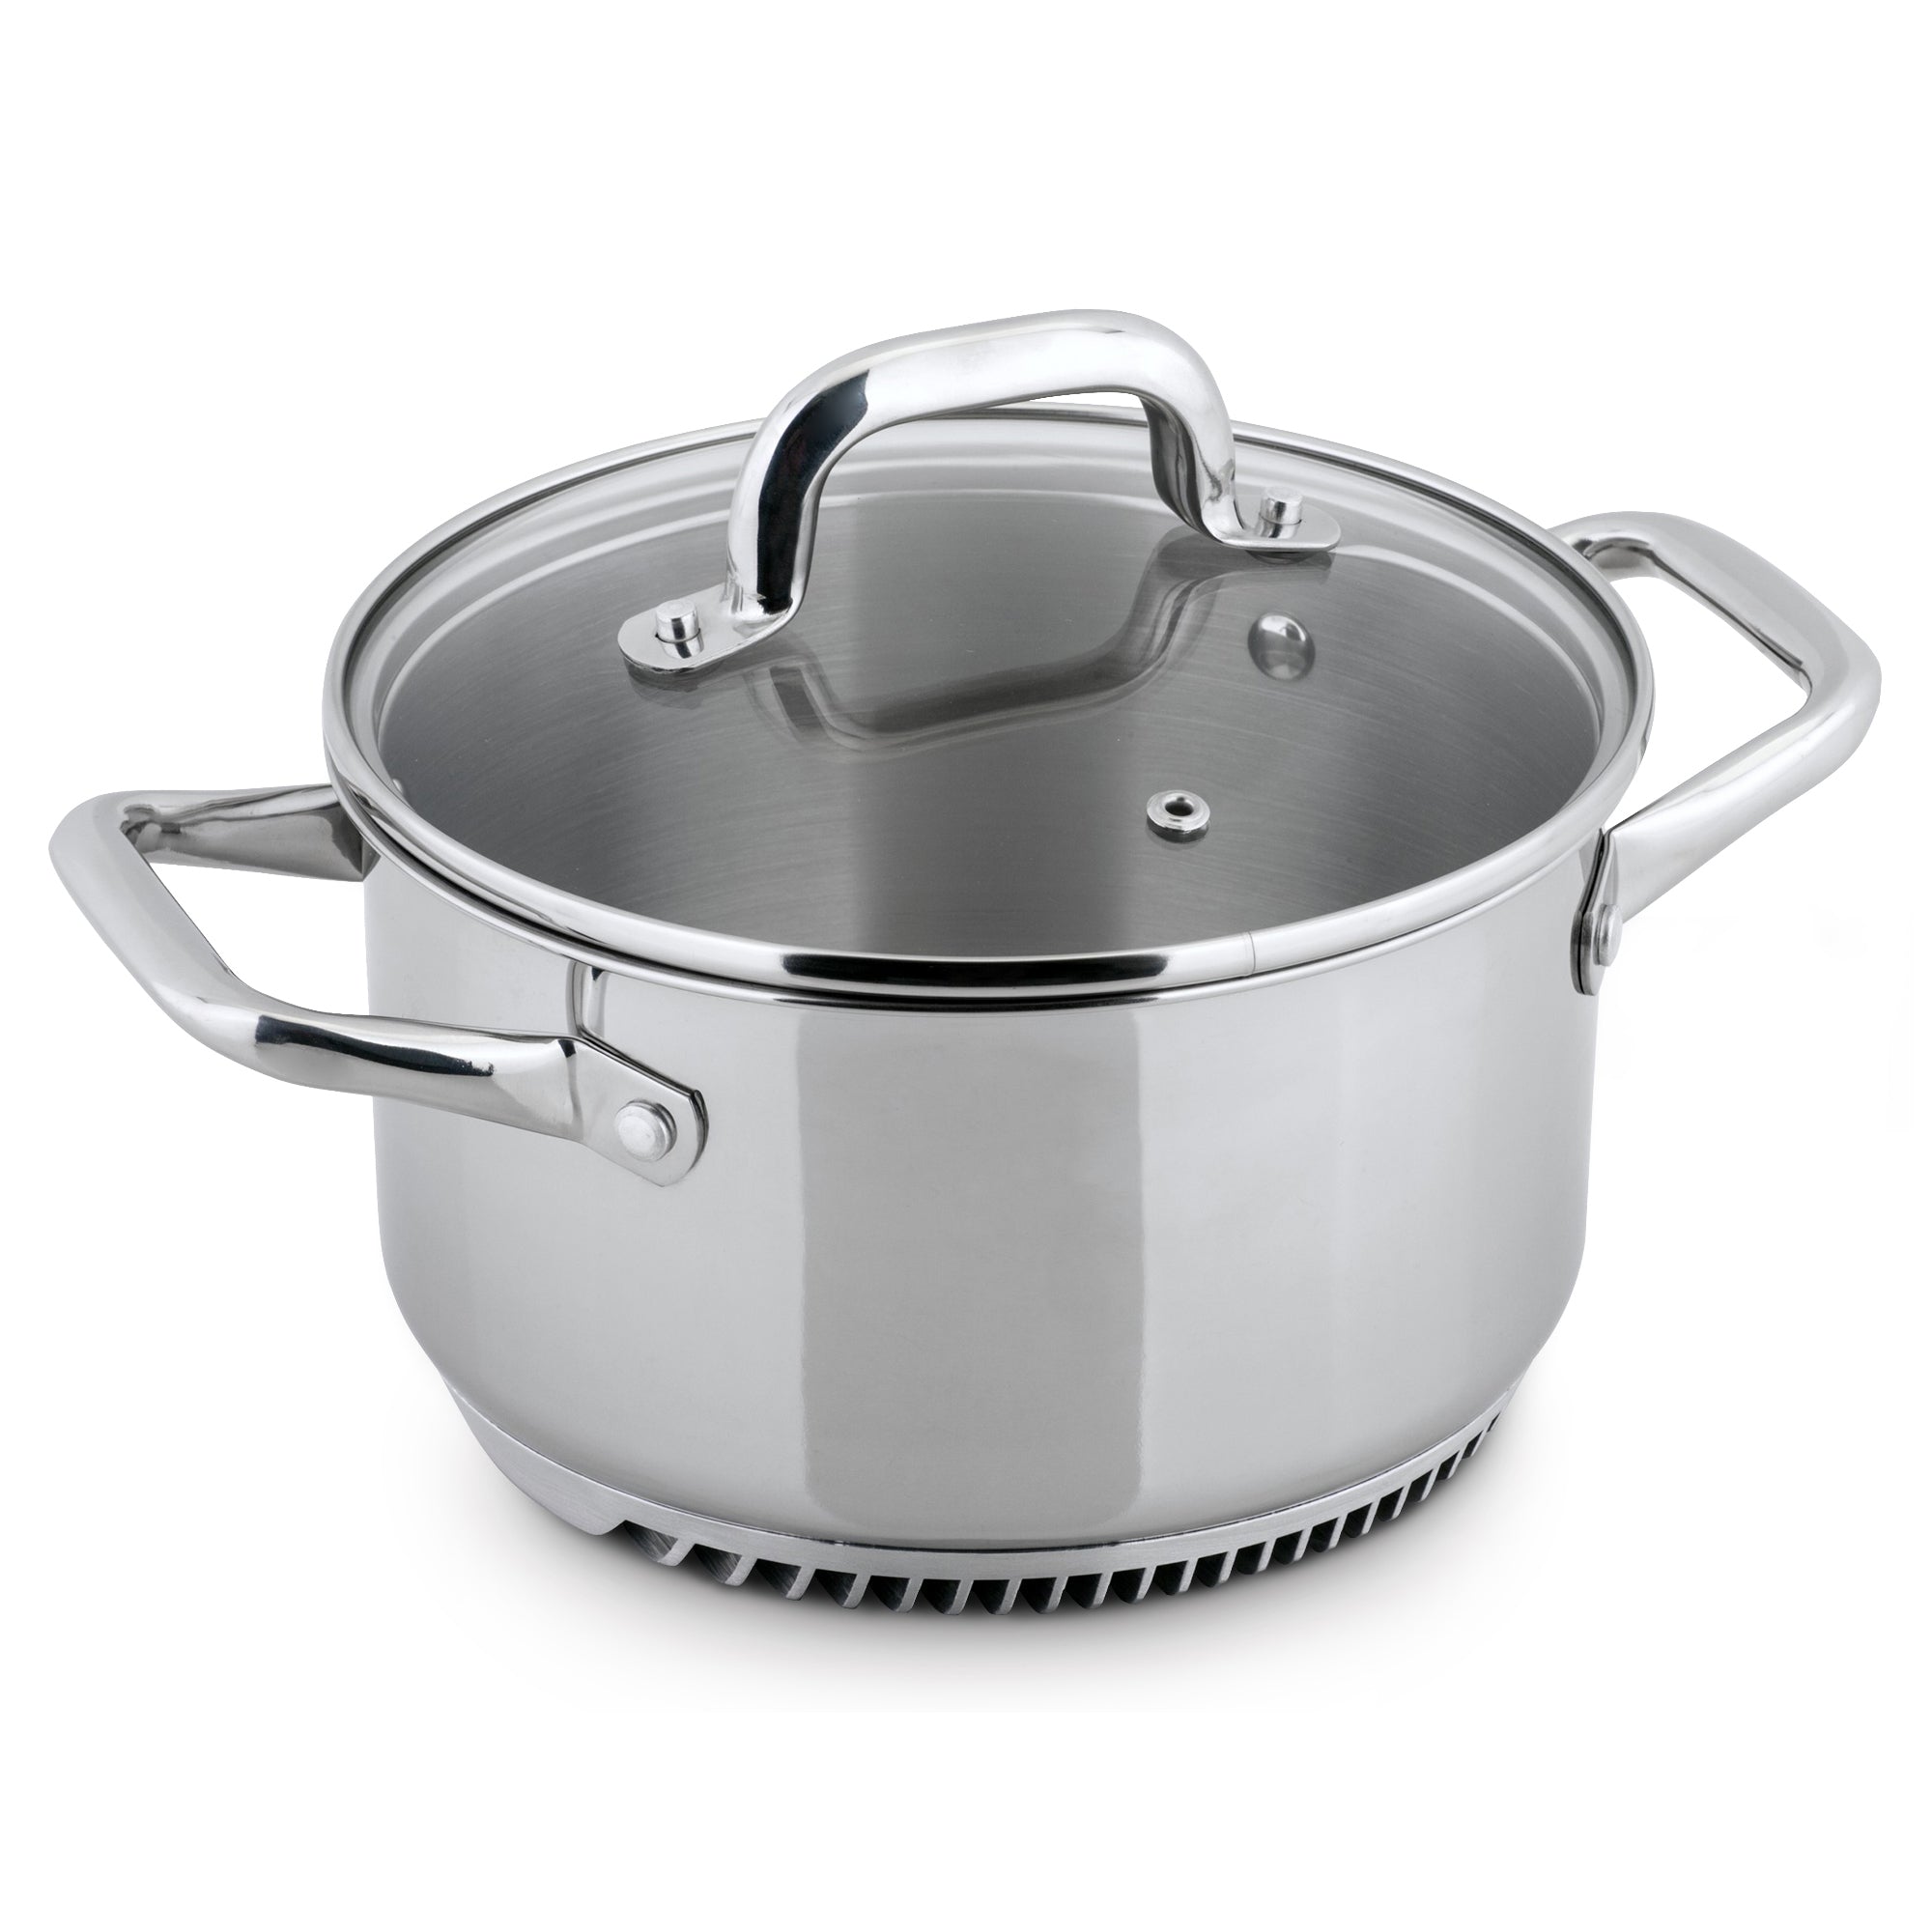 304 Stainless Steel Pot with Glass Lid, Stay Cool Handle, Non